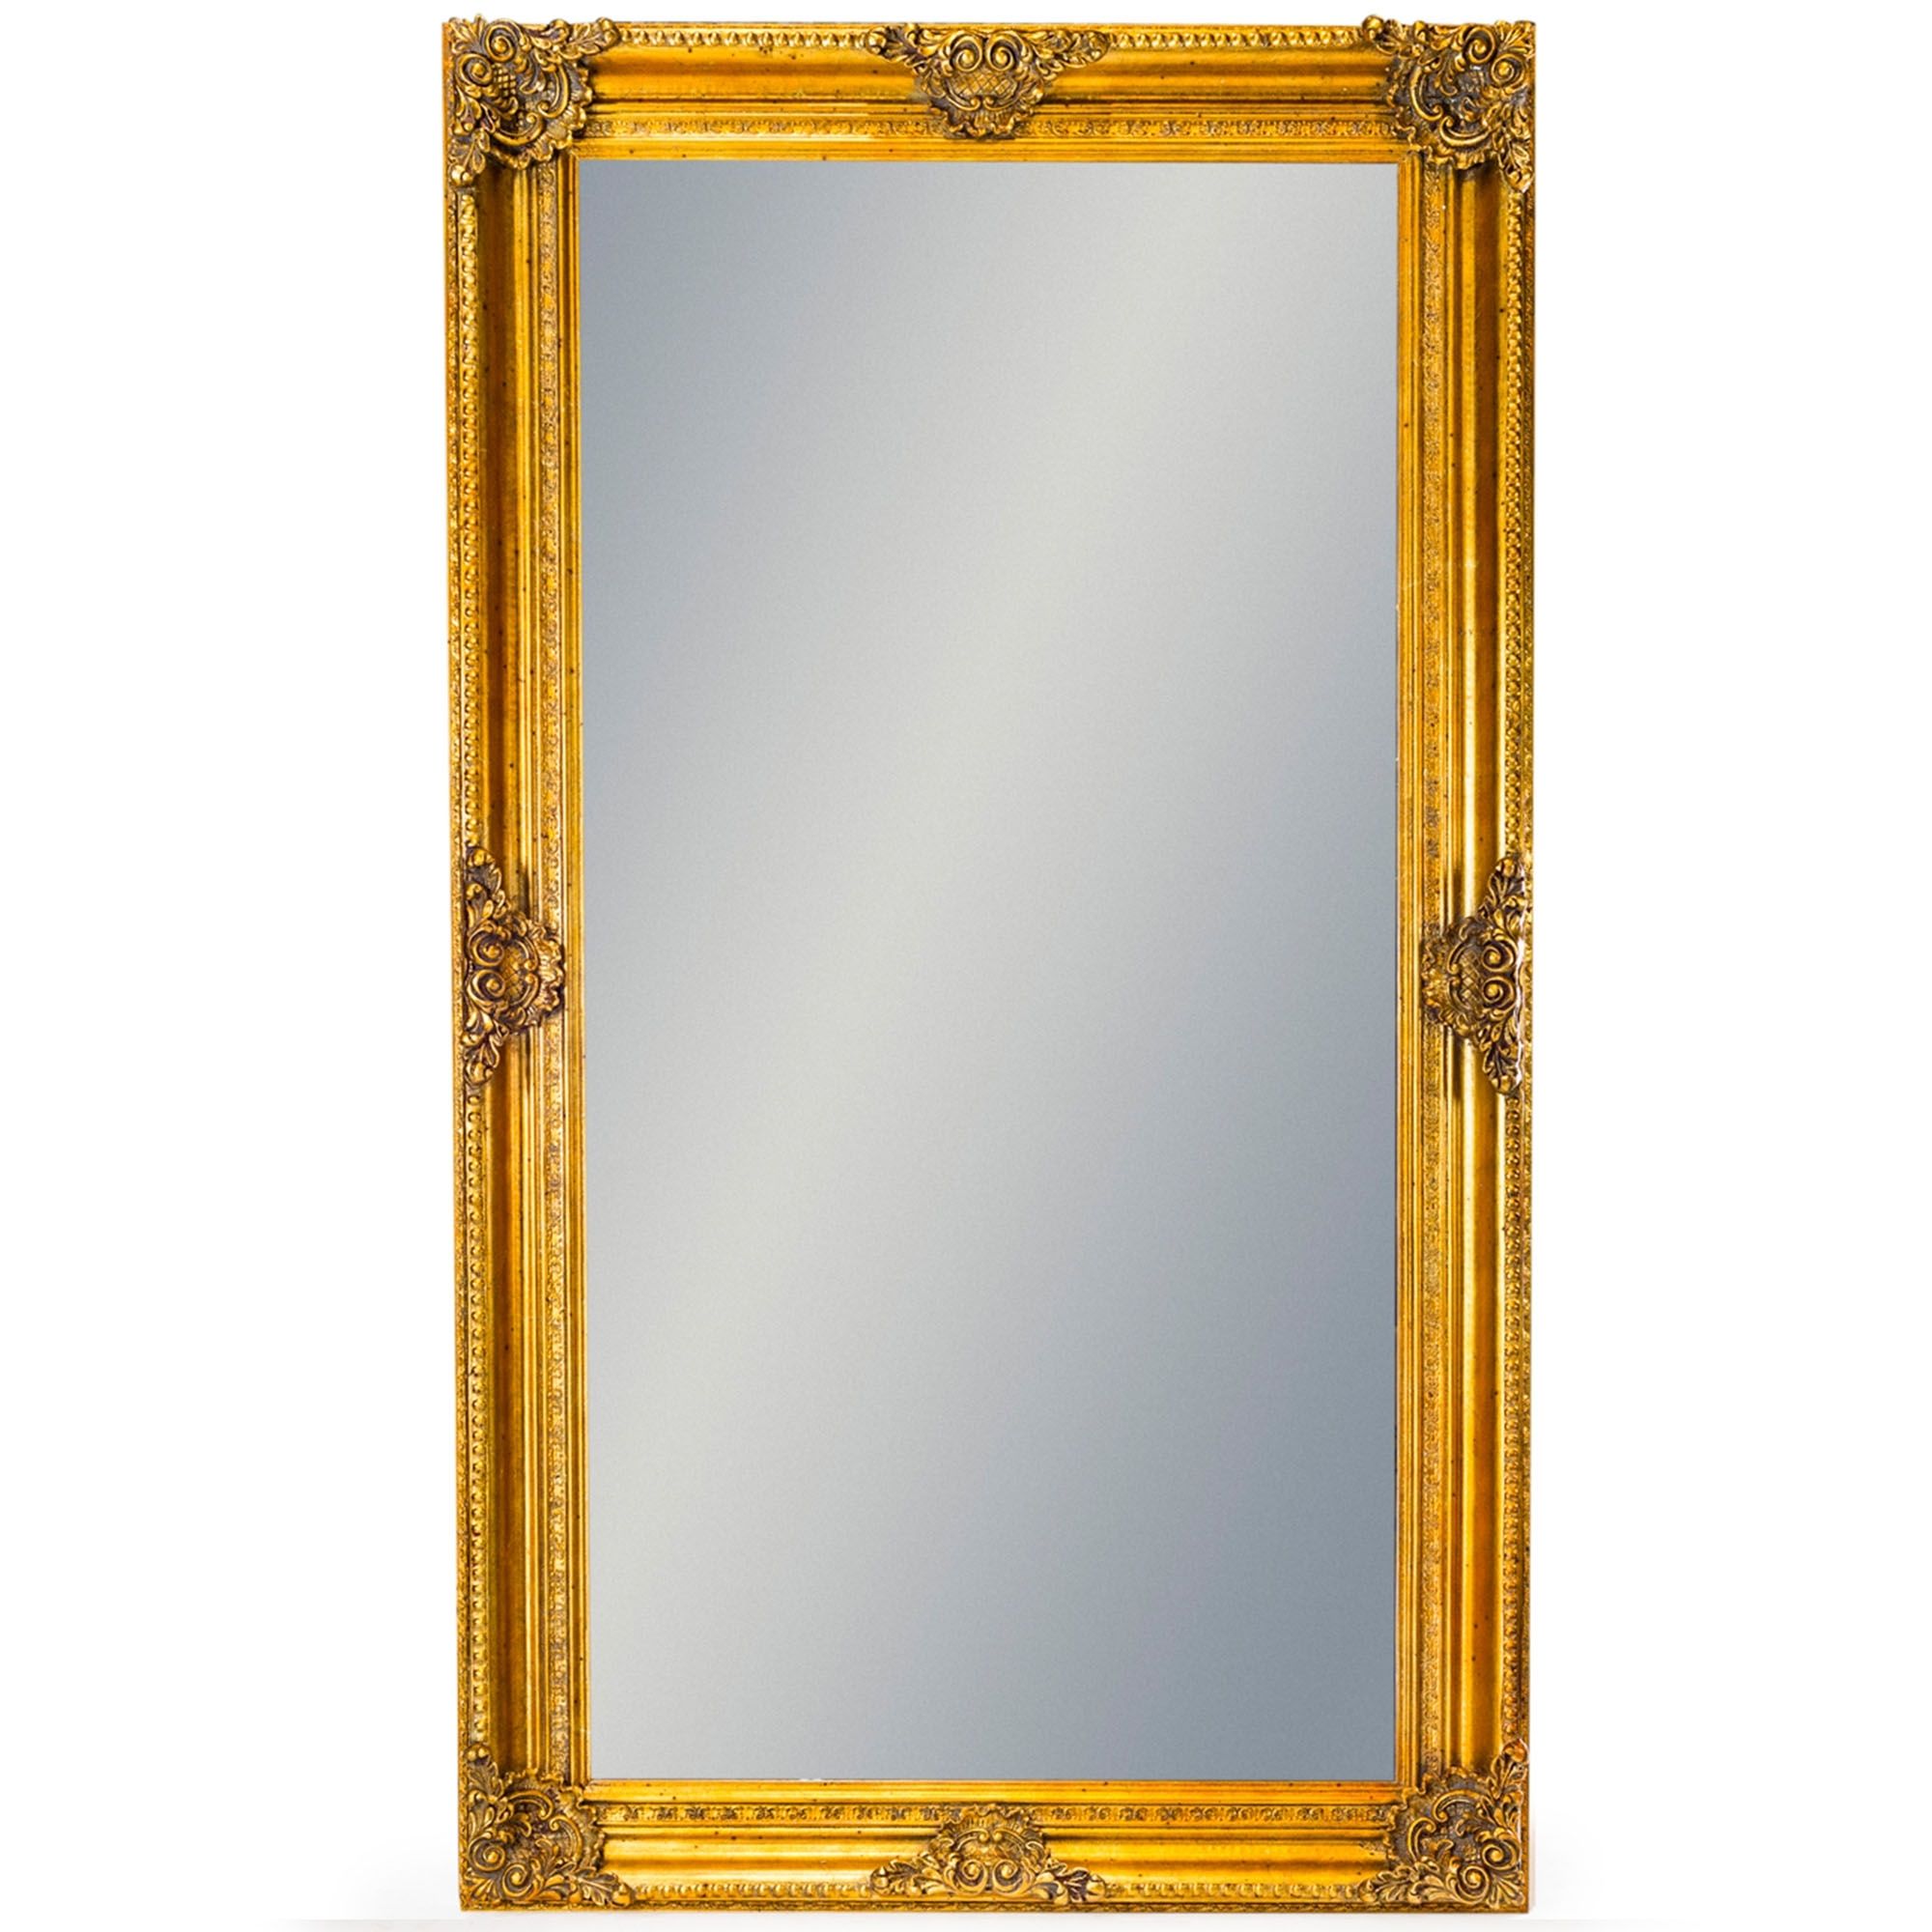 Large Gold Rectangular Classic Antique French Style Mirror Online Pertaining To Dark Gold Rectangular Wall Mirrors (View 5 of 15)